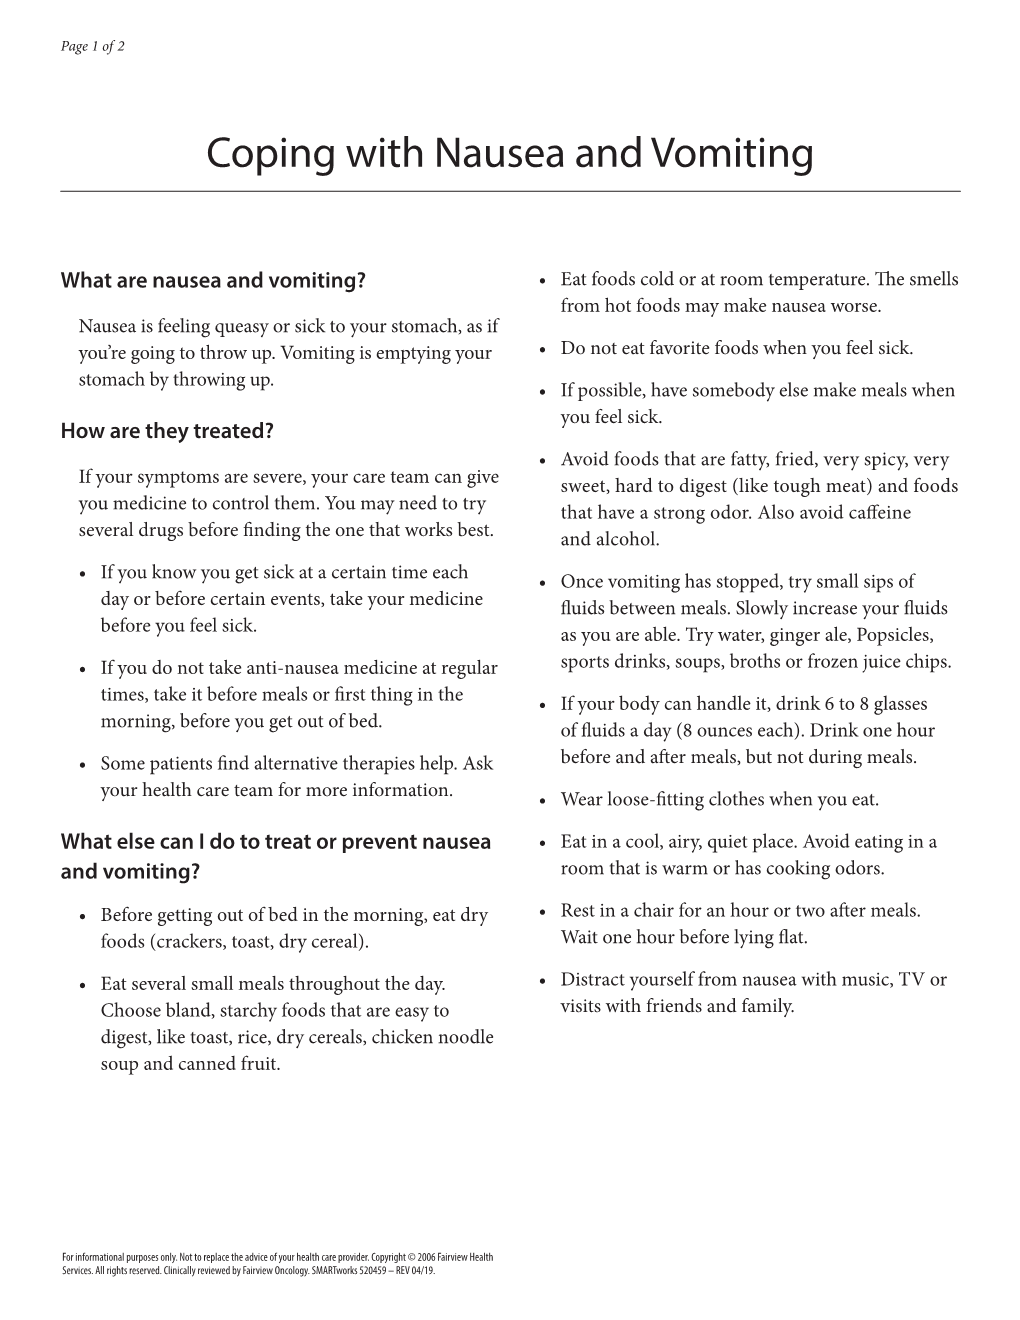 Coping with Nausea and Vomiting